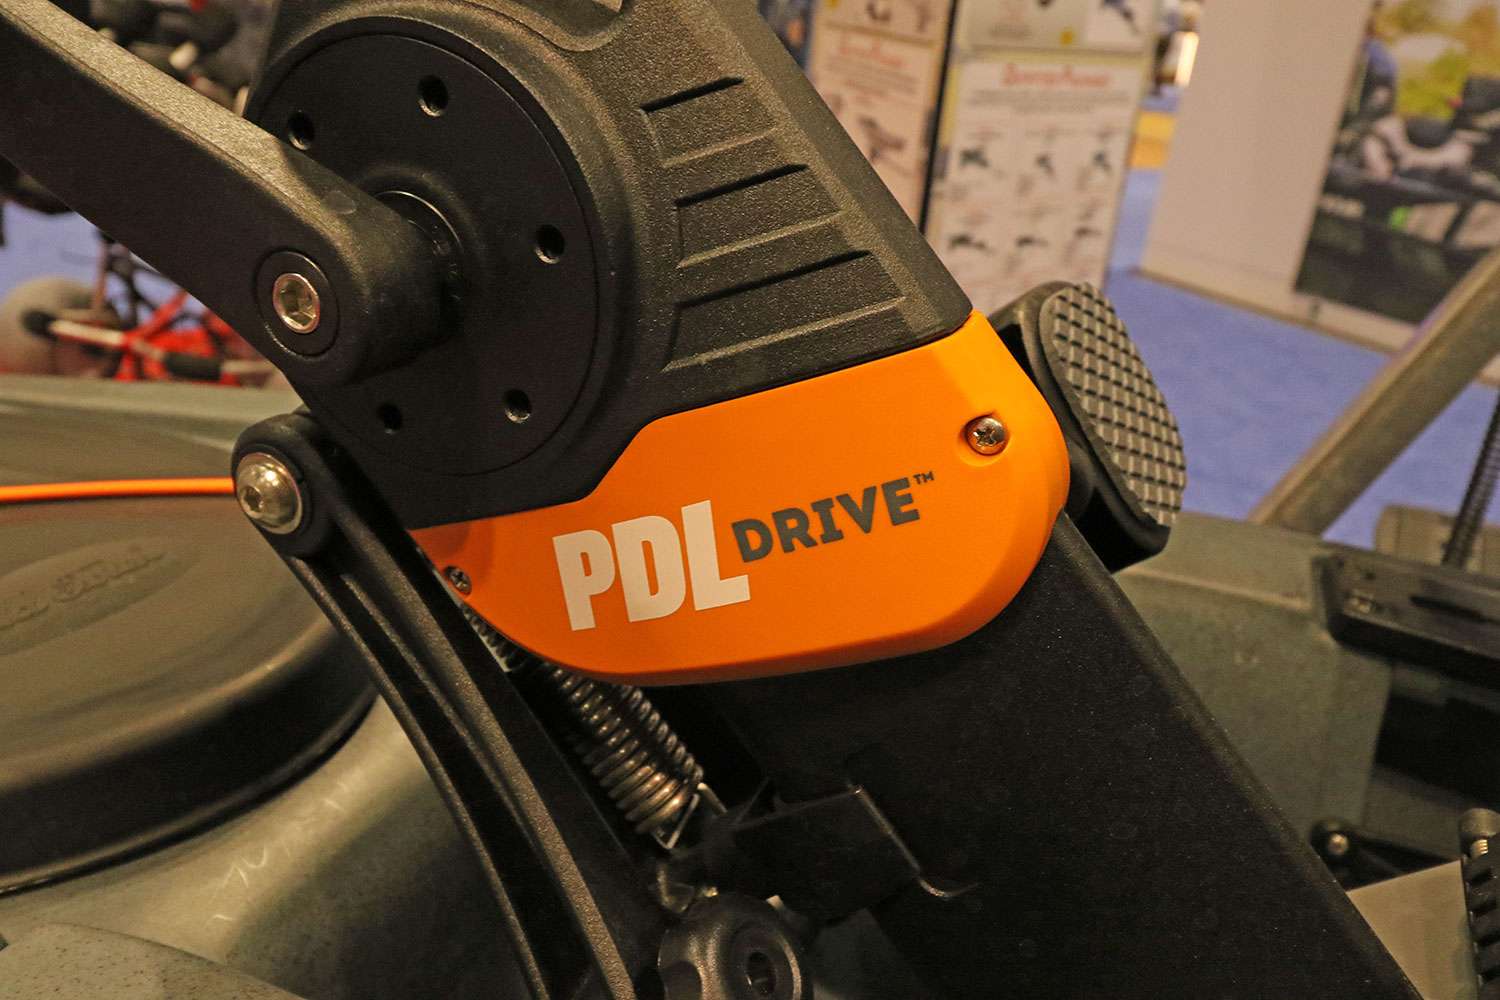 And the same awesome PDL drive system comes standard in the Predator. 